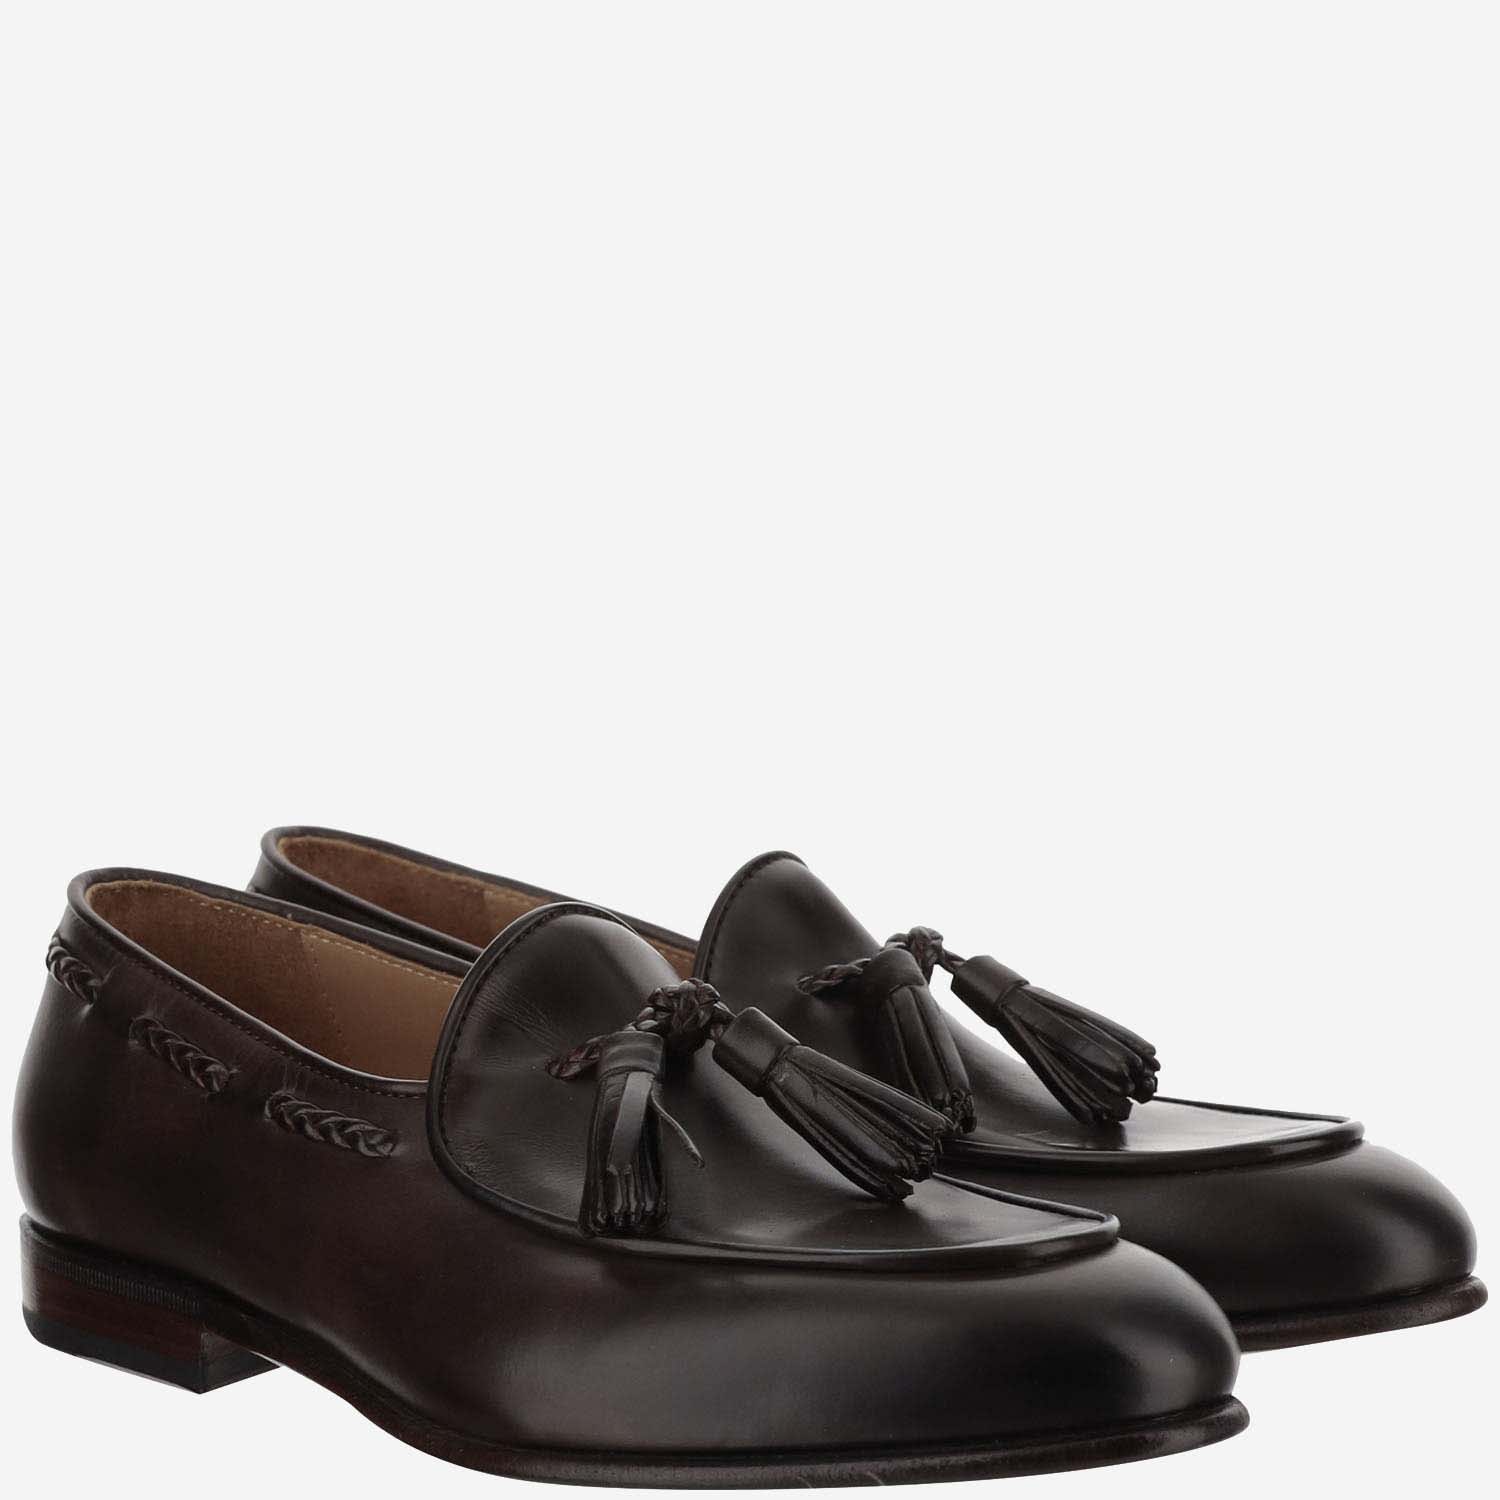 Shop Herve Chapelier Leather Loafers In Brown